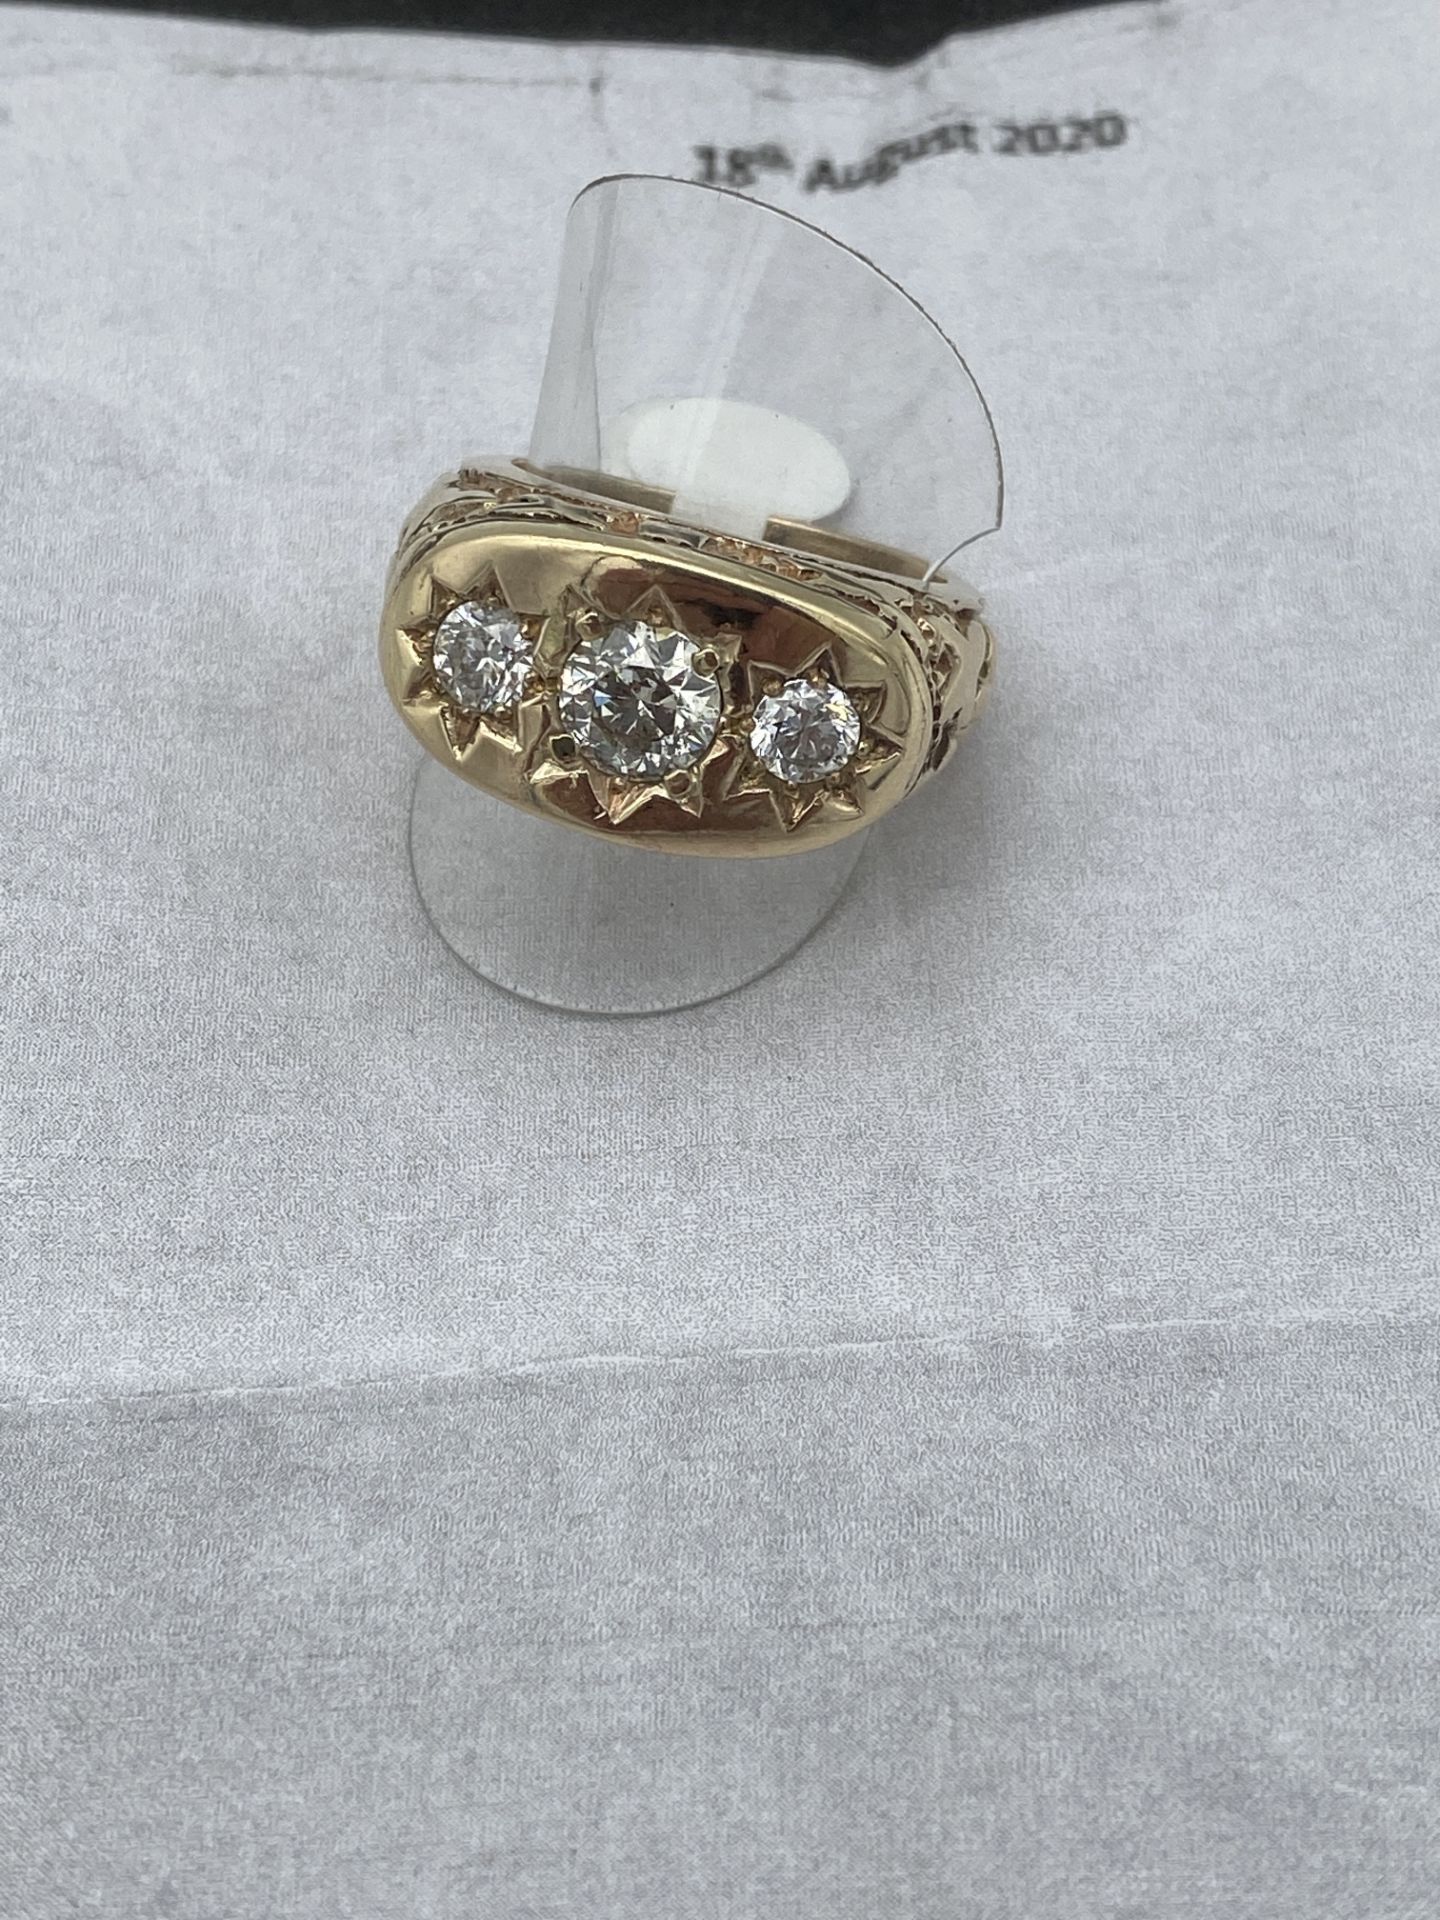 FINE HEAVY GENTS 3 STONE 2.55ct DIAMOND RING WITH COPY OF VALUATION - £22,200 - Image 6 of 8